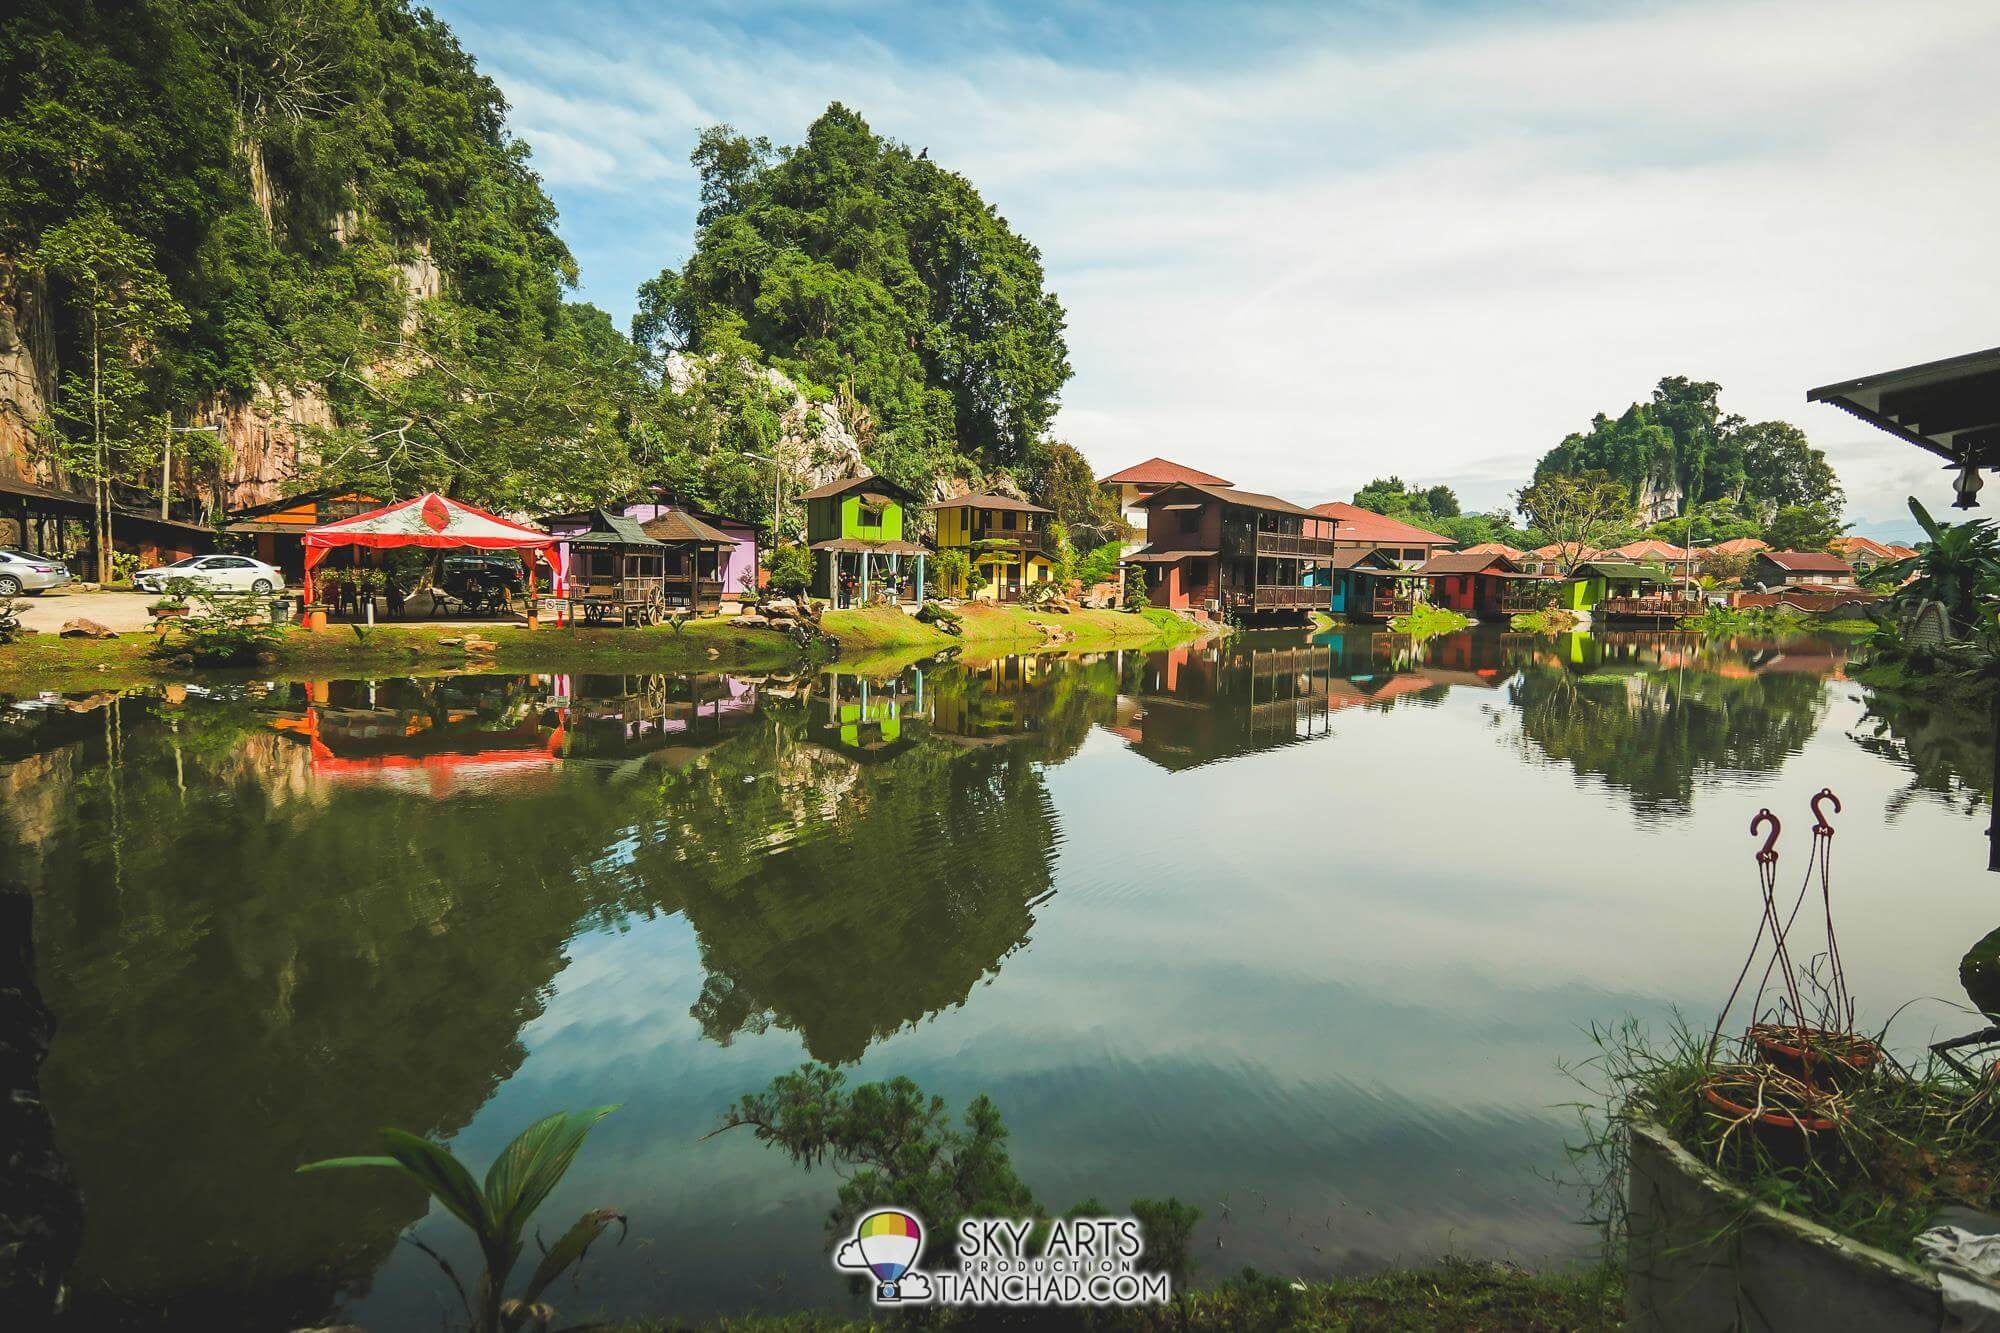 7 Insta-Worthy Locations In Ipoh You Absolutely Have To Visit For Gorgeous Instagram Feed - WORLD OF BUZZ 4